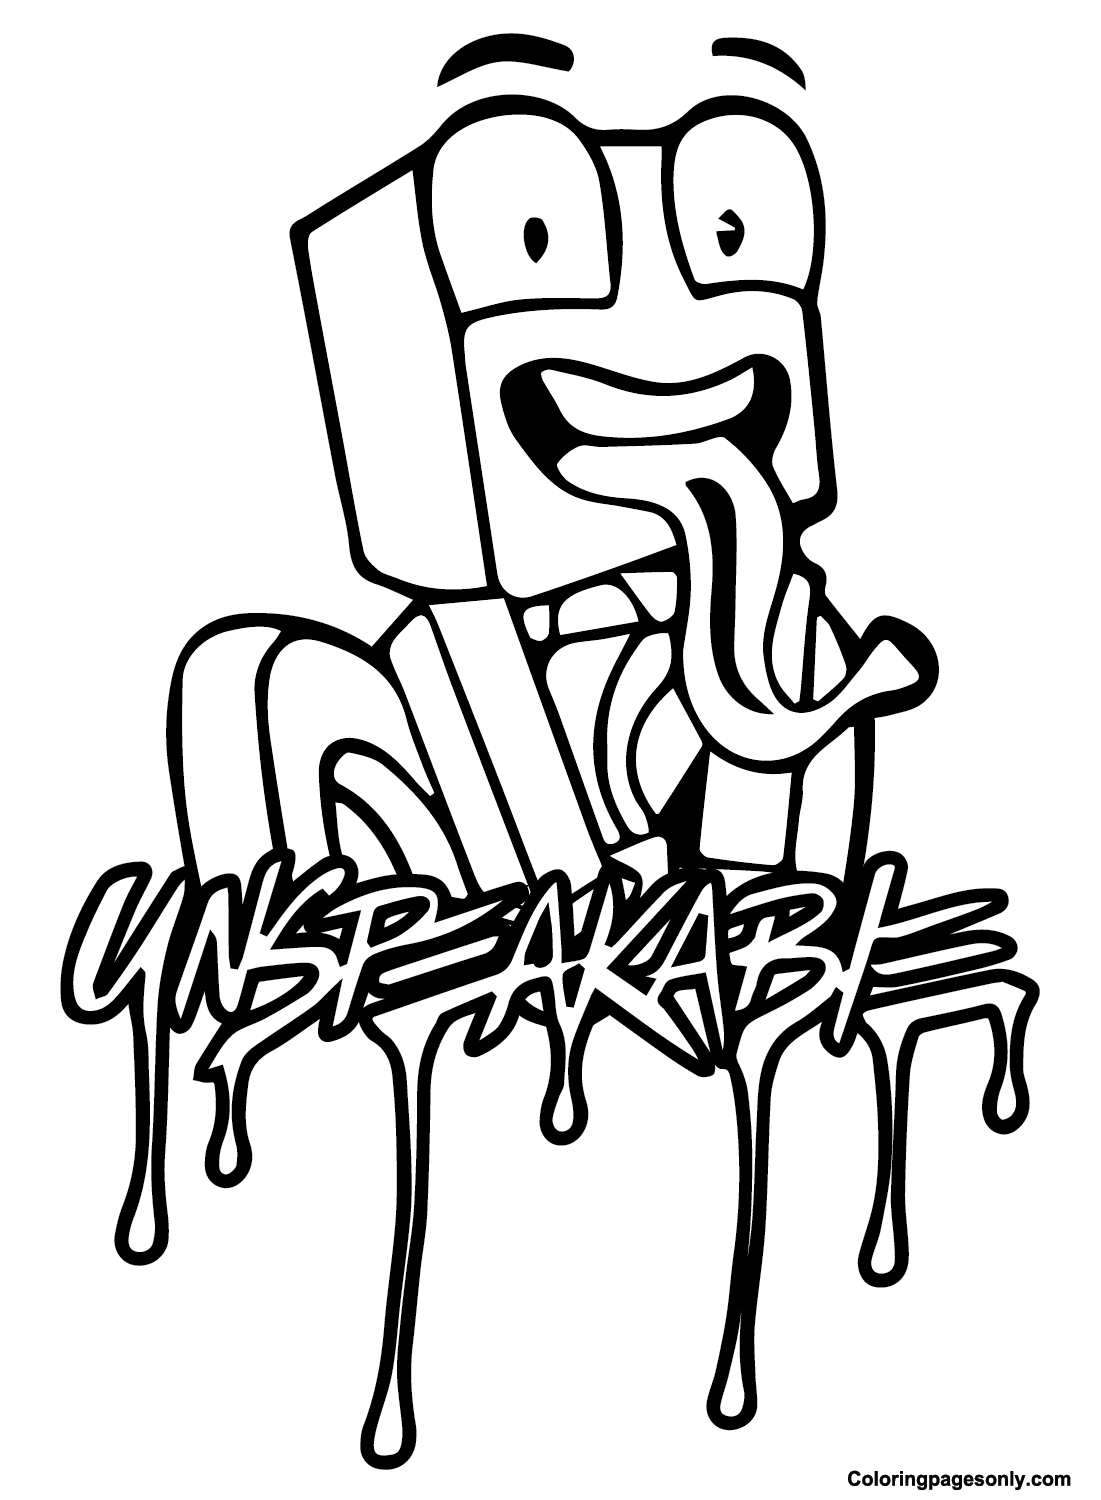 Images Unspeakable Coloring Page